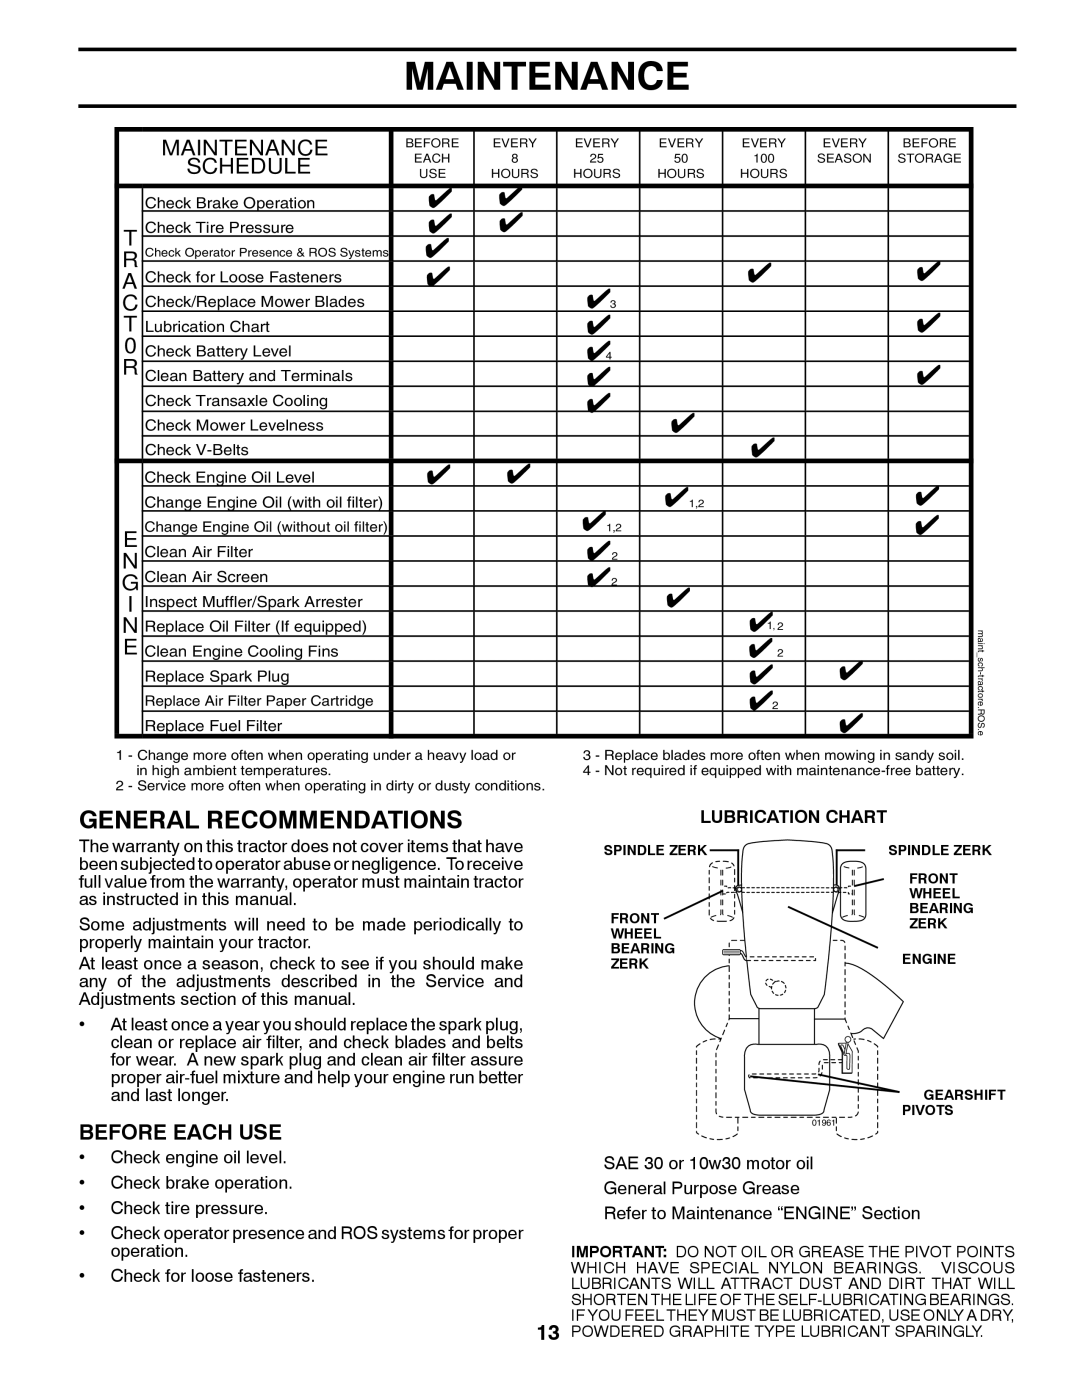 Poulan PXT16542 manual Maintenance, Lubrication Chart, Powdered Graphite Type Lubricant Sparingly 